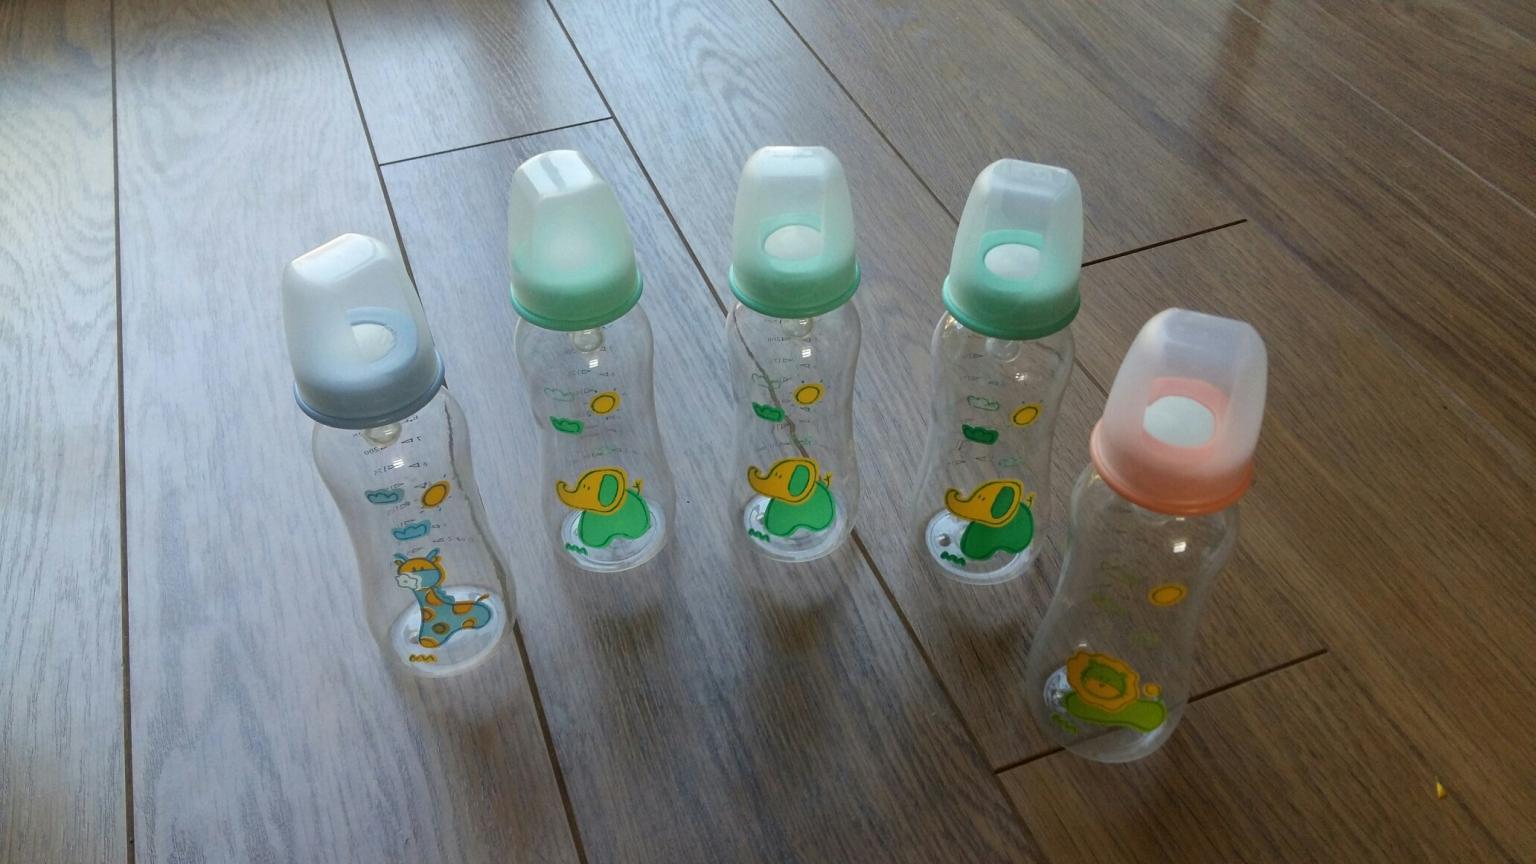 boots baby bottles